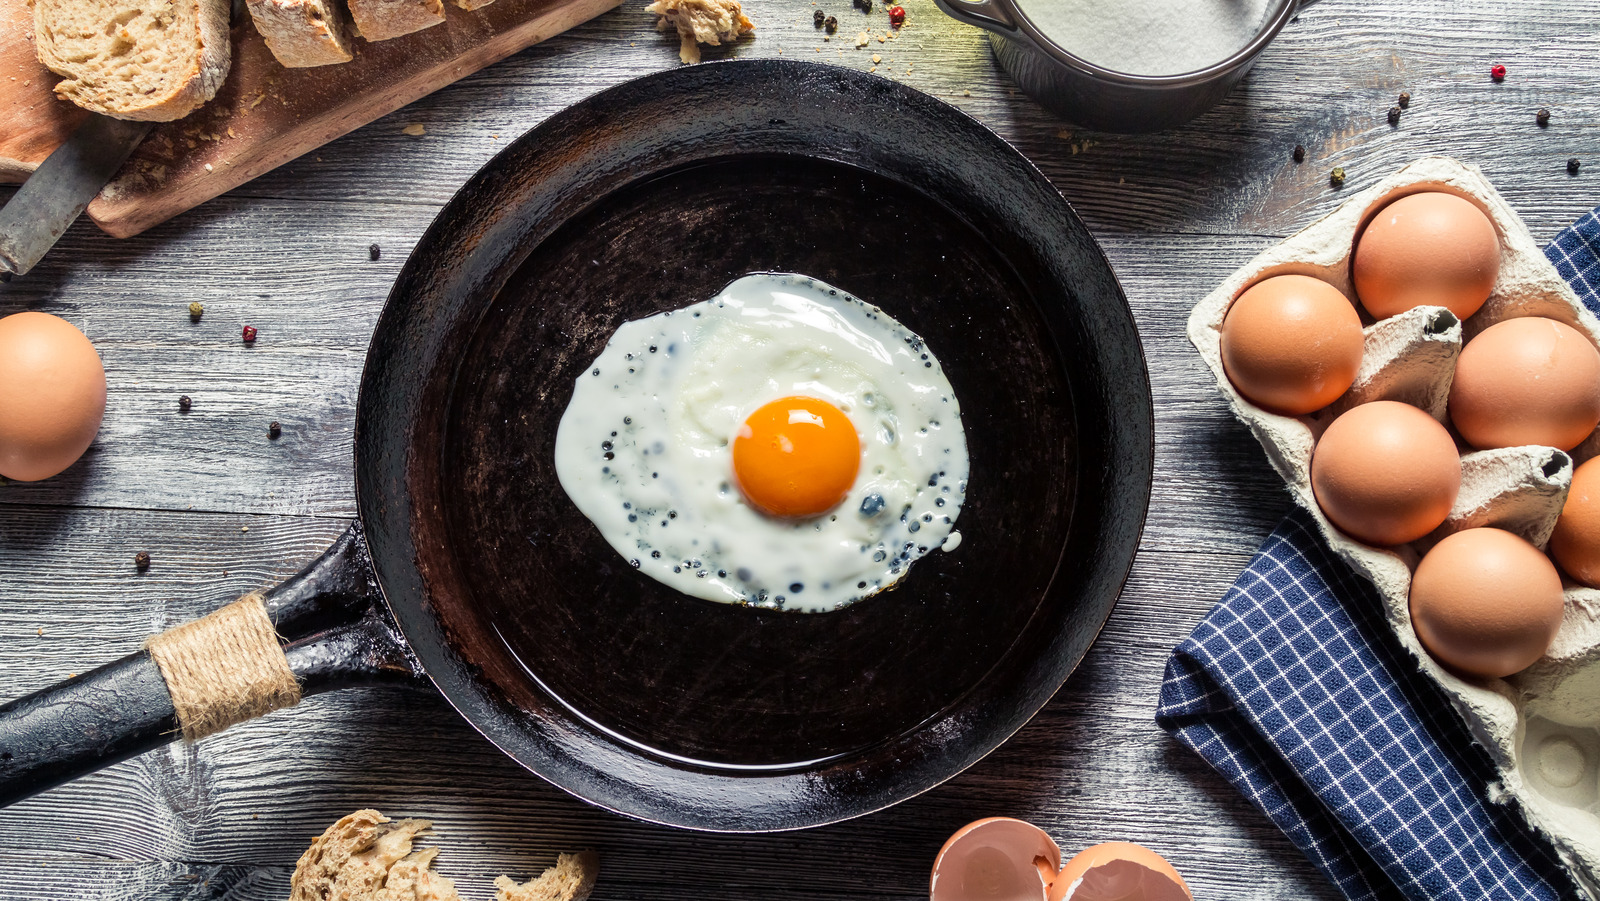 https://www.thedailymeal.com/img/gallery/the-pan-tip-to-follow-for-perfectly-cooked-over-easy-eggs/l-intro-1702374061.jpg